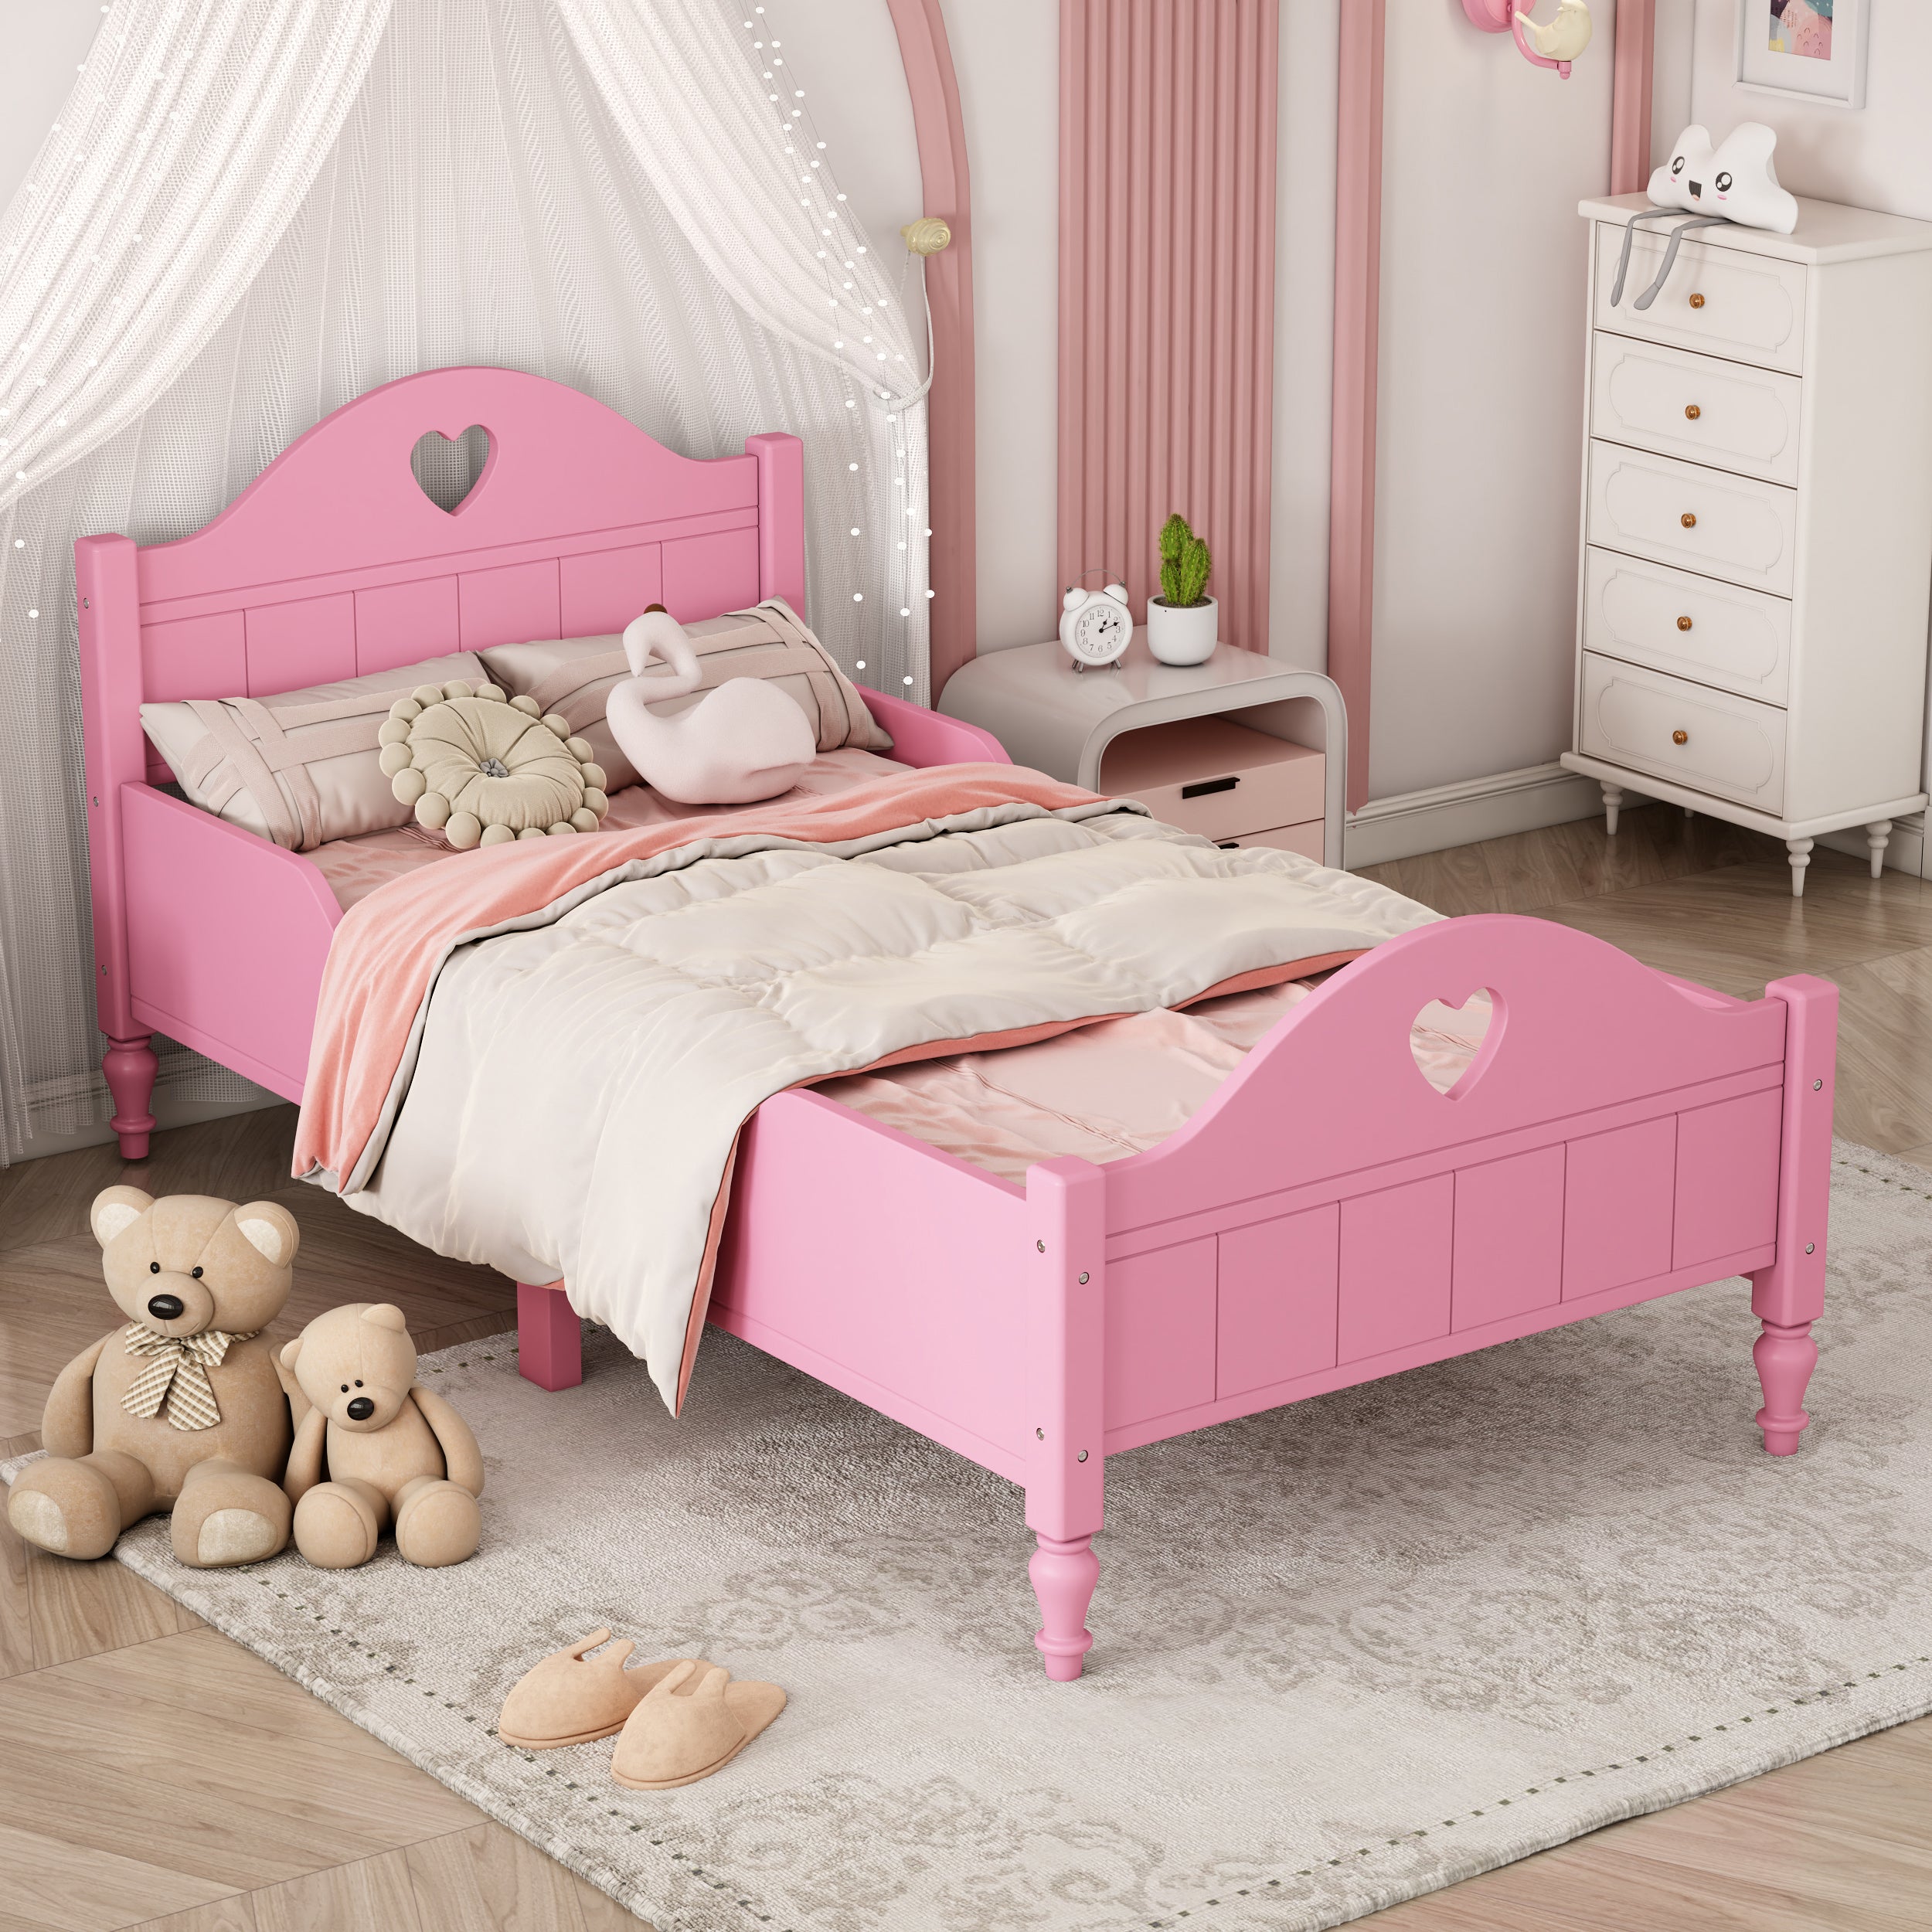 Girl's-Love-Princess-Bed-Macaron-Twin-Size-Toddler-Bed-with-Side-Safety-Rails-,-Light-Pink-Kids-Beds